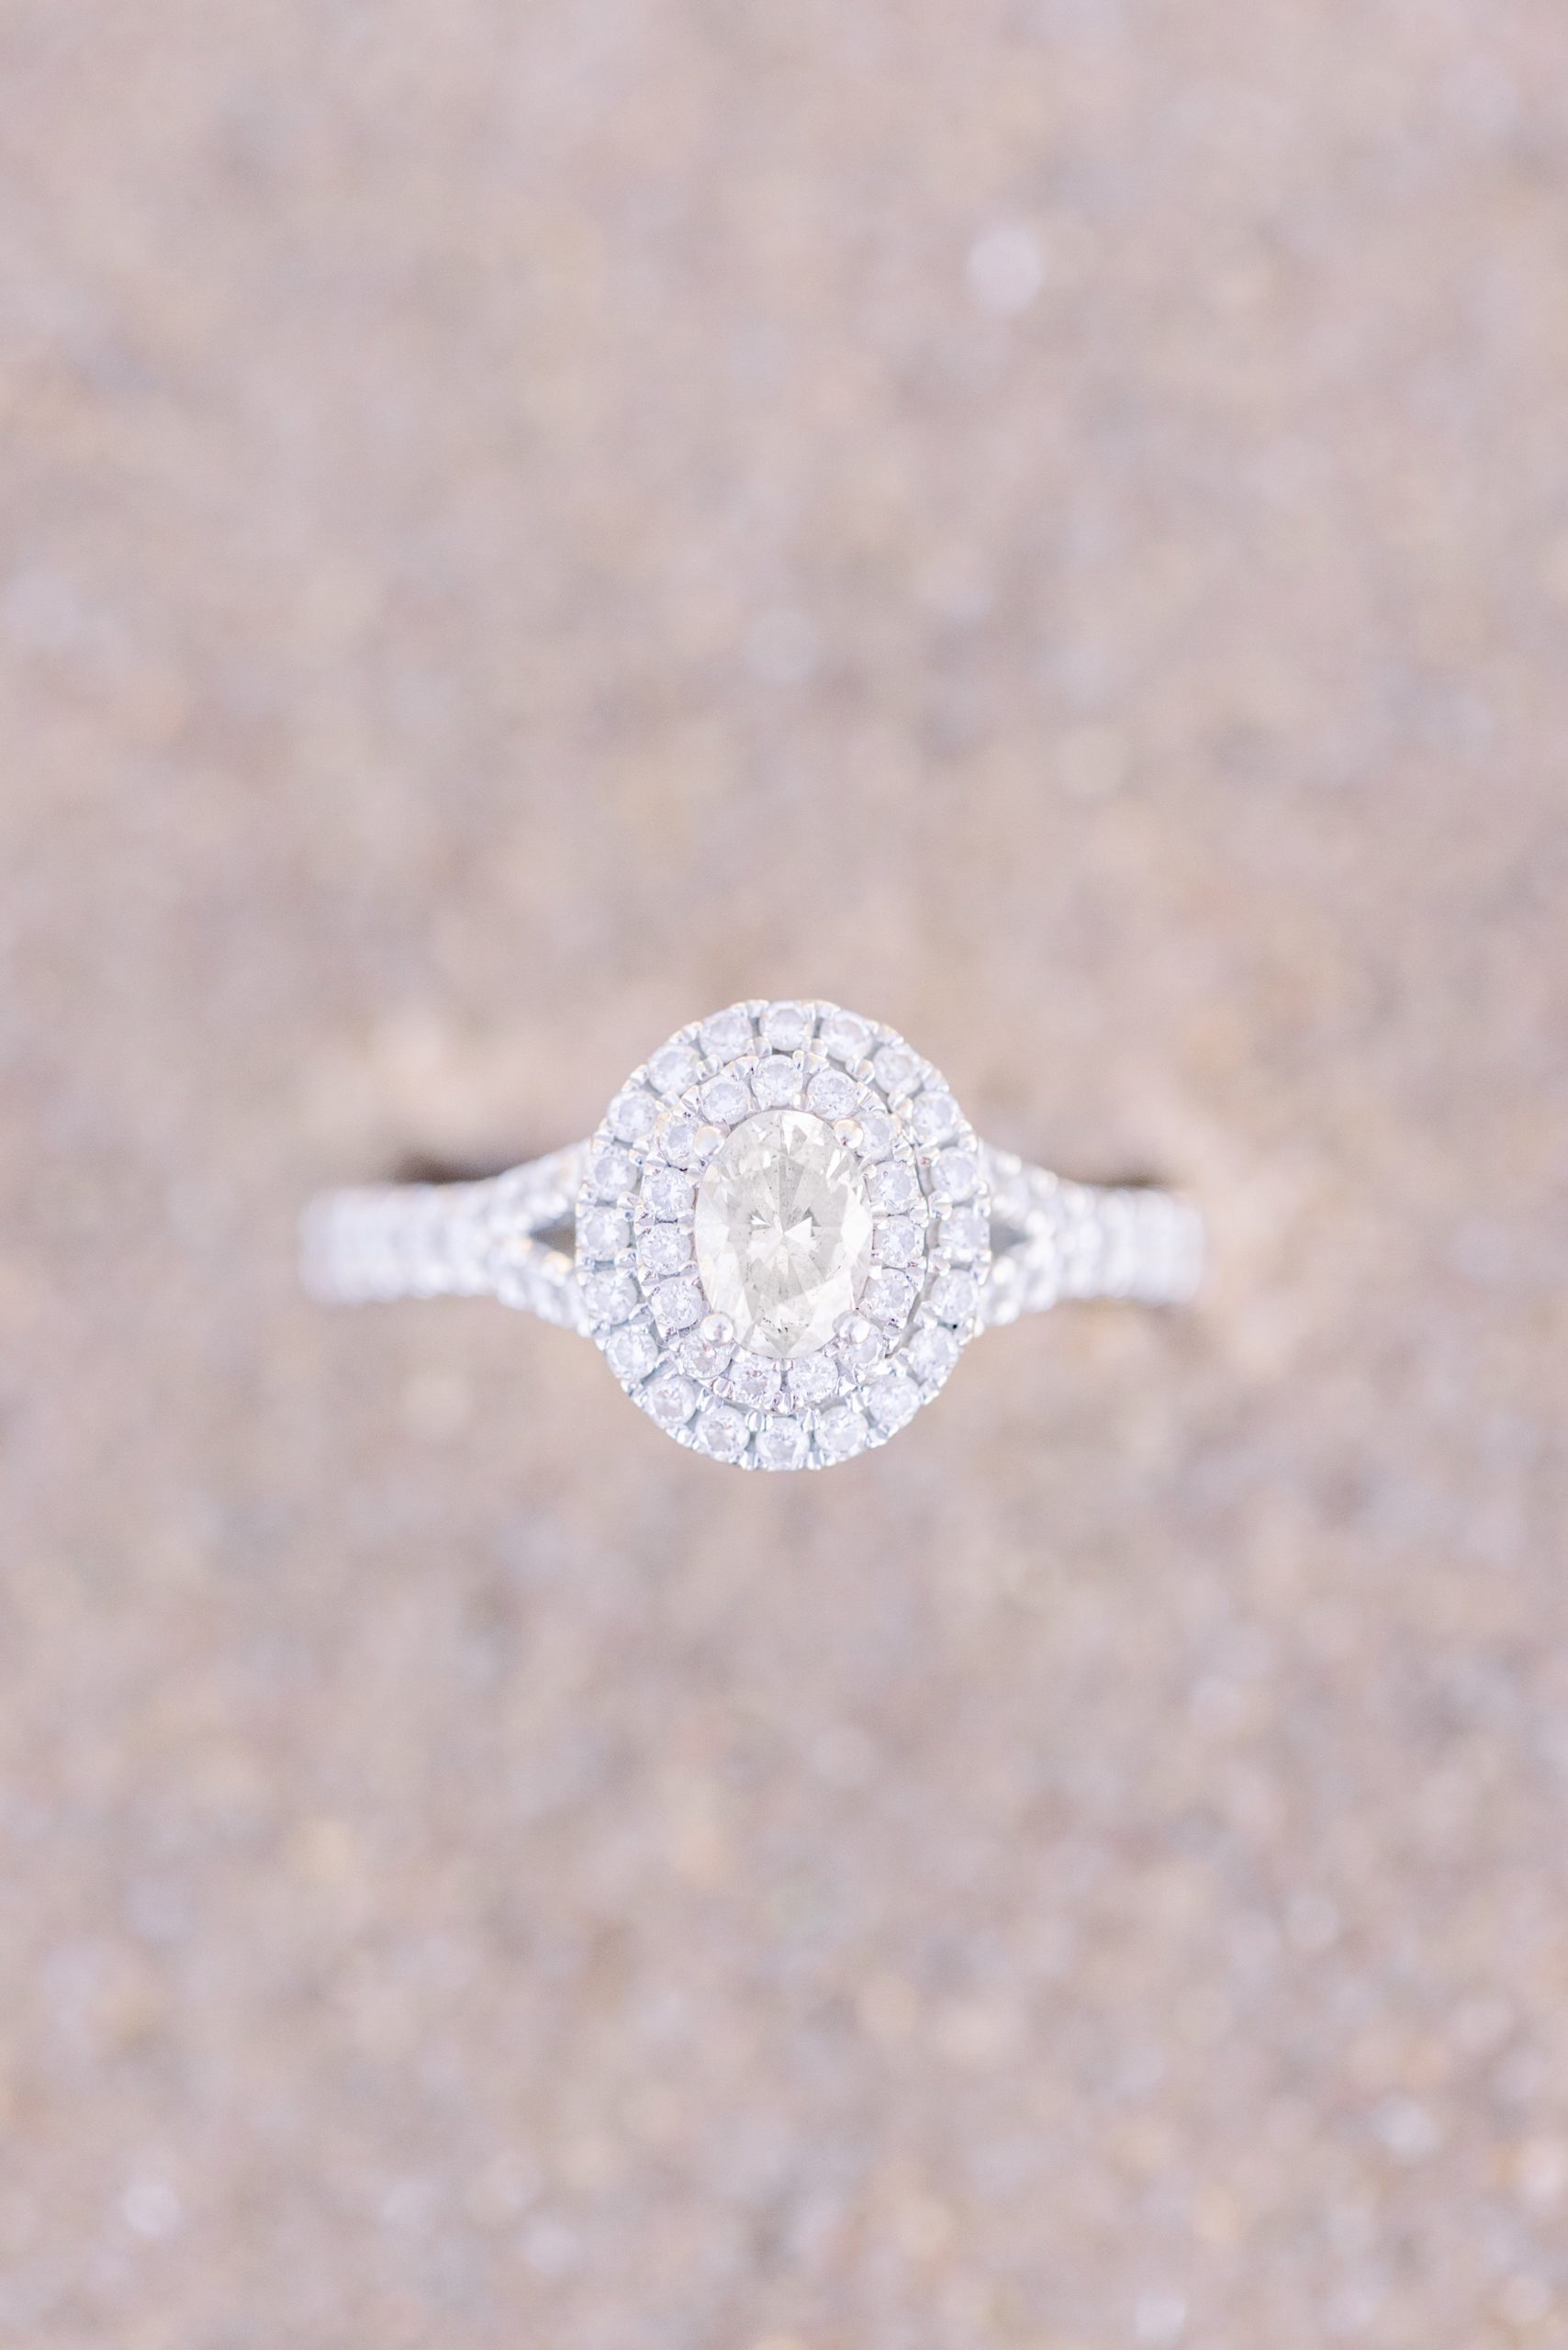 Ring buried in the sand during Harbor Springs Engagement Session.